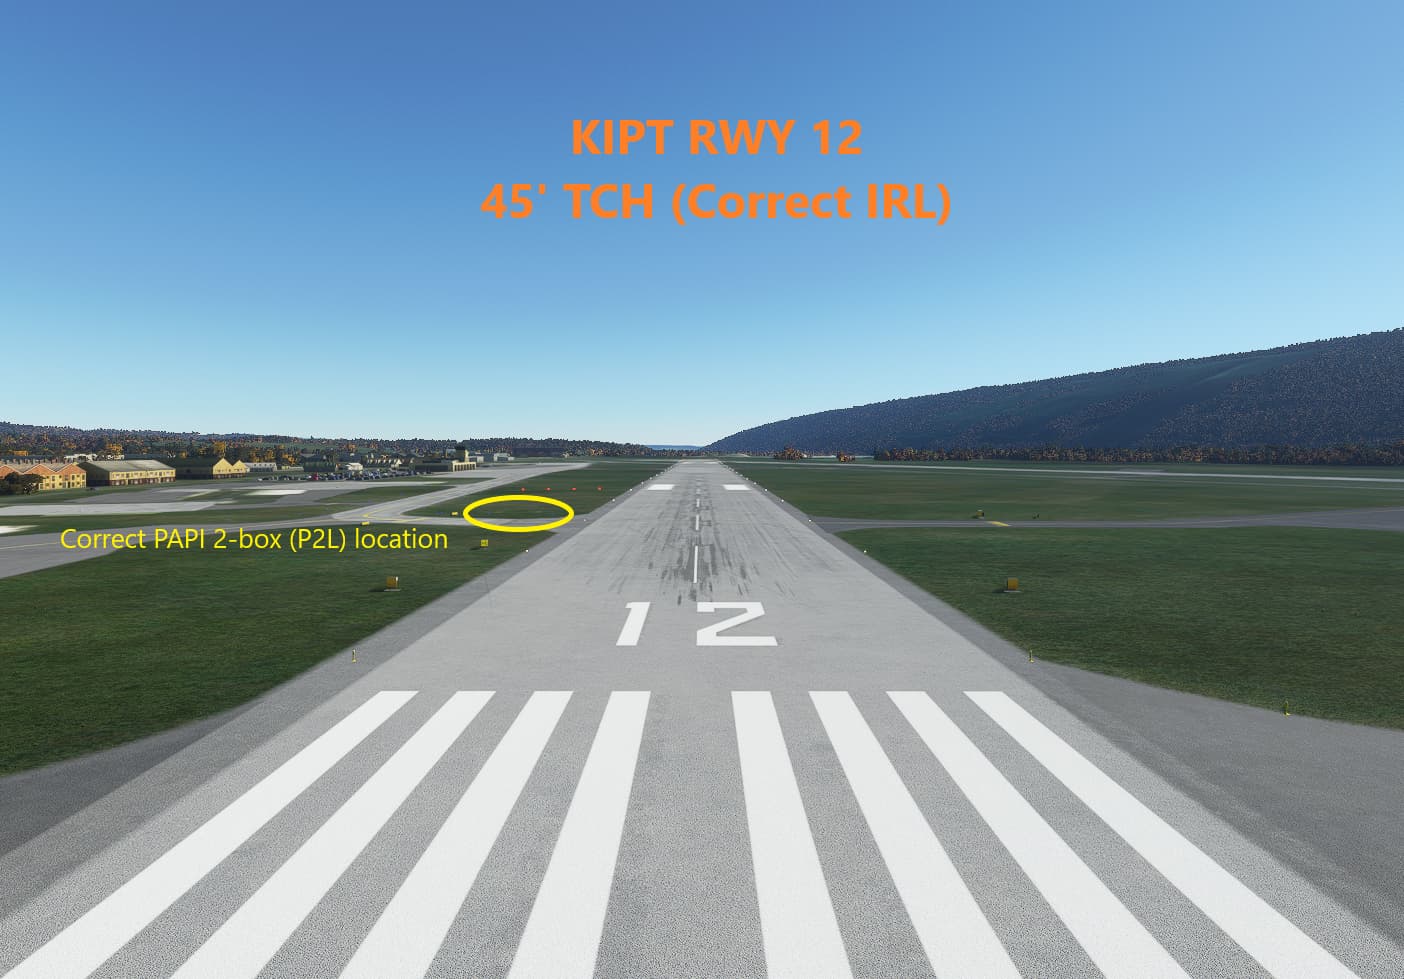 PAPI VASI lights have wrong placement, long landings, or are missing - Scenery and Airports Microsoft Flight Simulator Forums